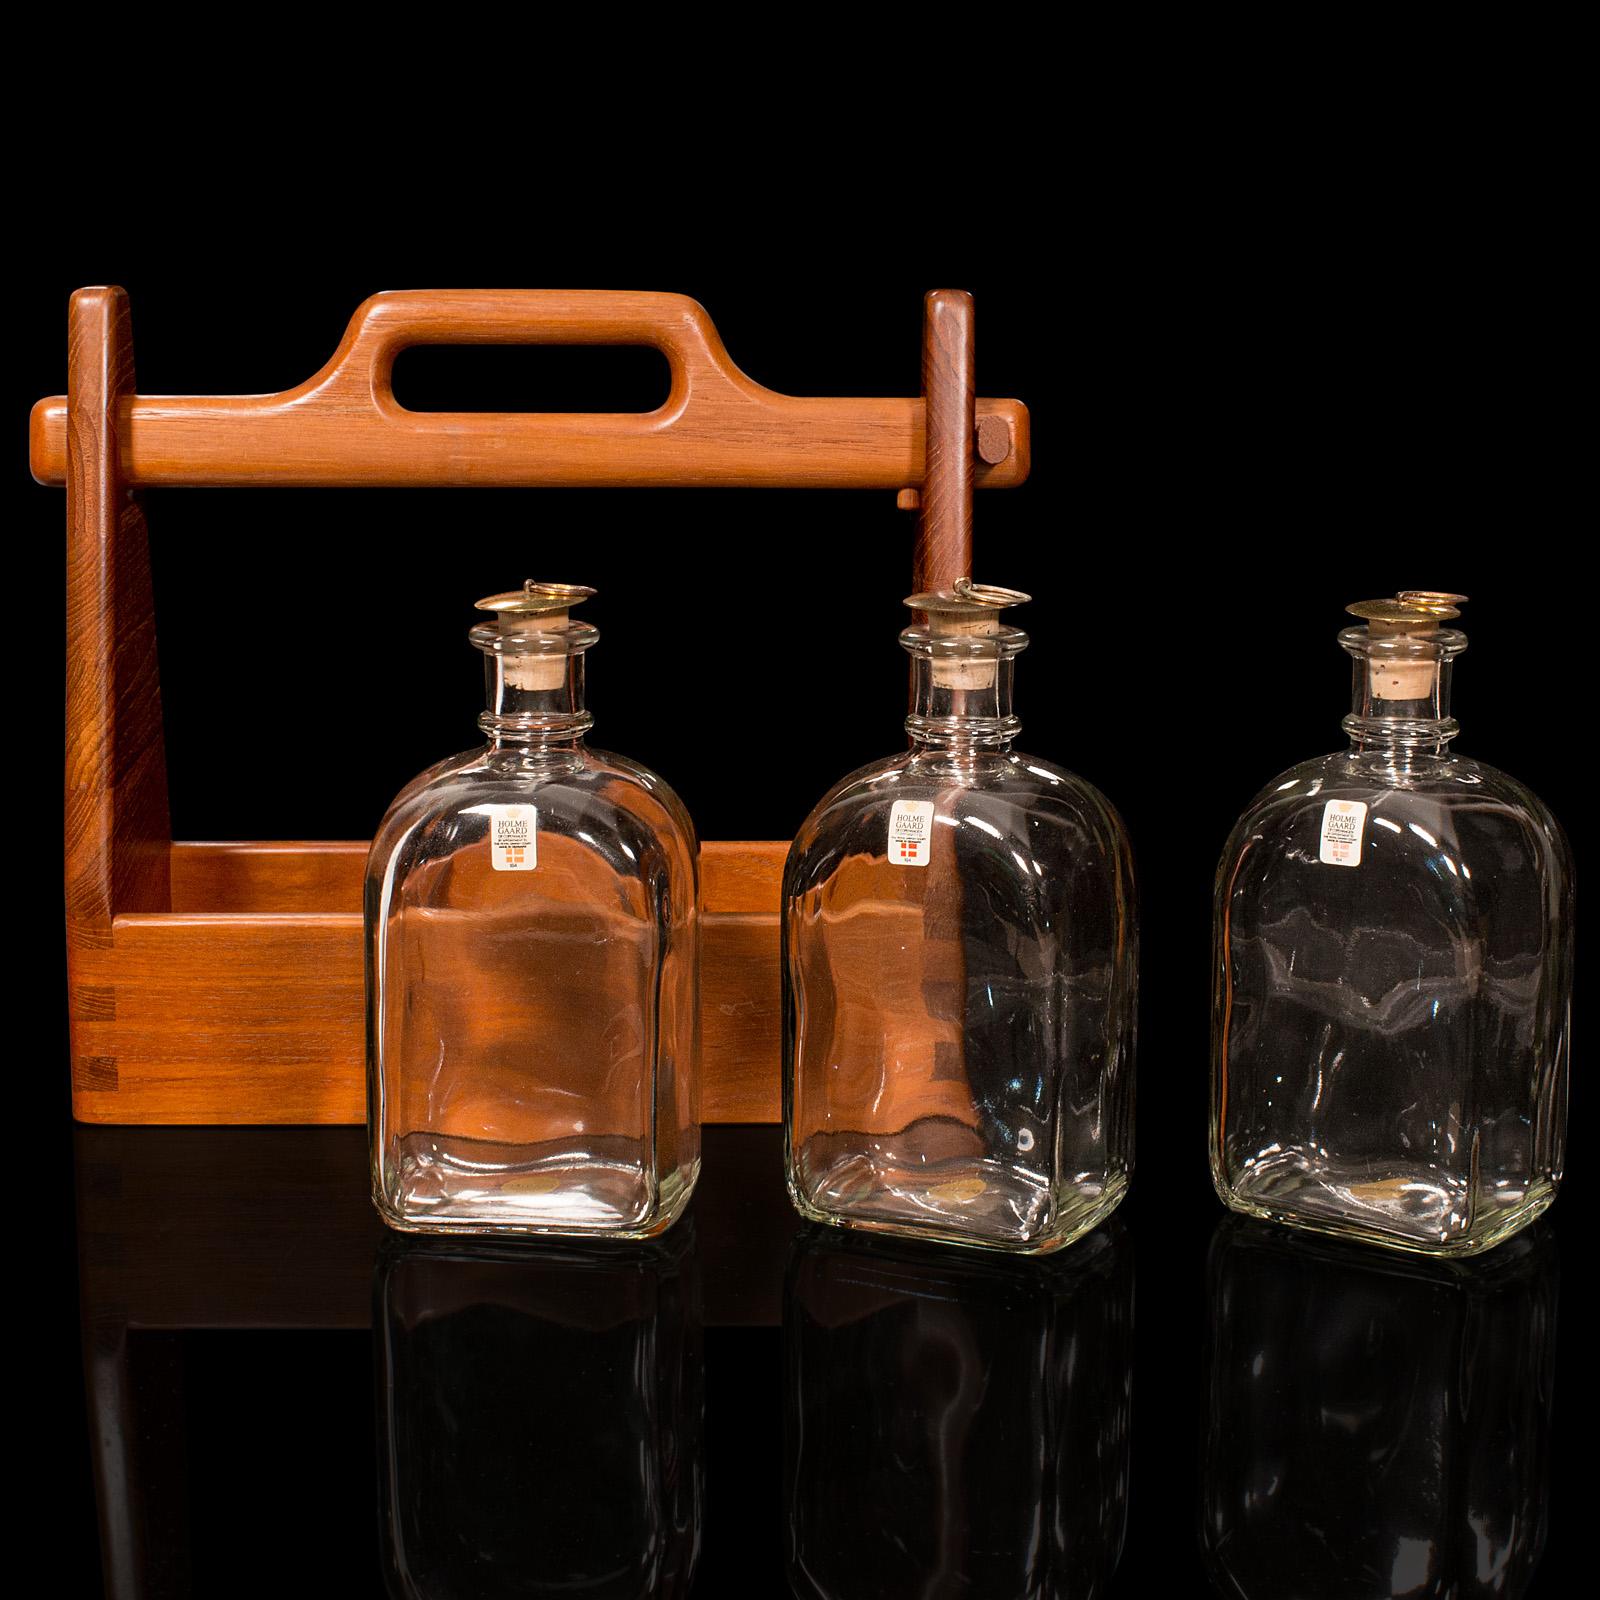 This is a vintage spirit Tantalus. A Danish, teak and glass bar caddy, dating to the mid 20th century, circa 1960.

Appealing Scandinavian craftsmanship, with fascinating form and function
Displays a desirable aged patina and excellent condition